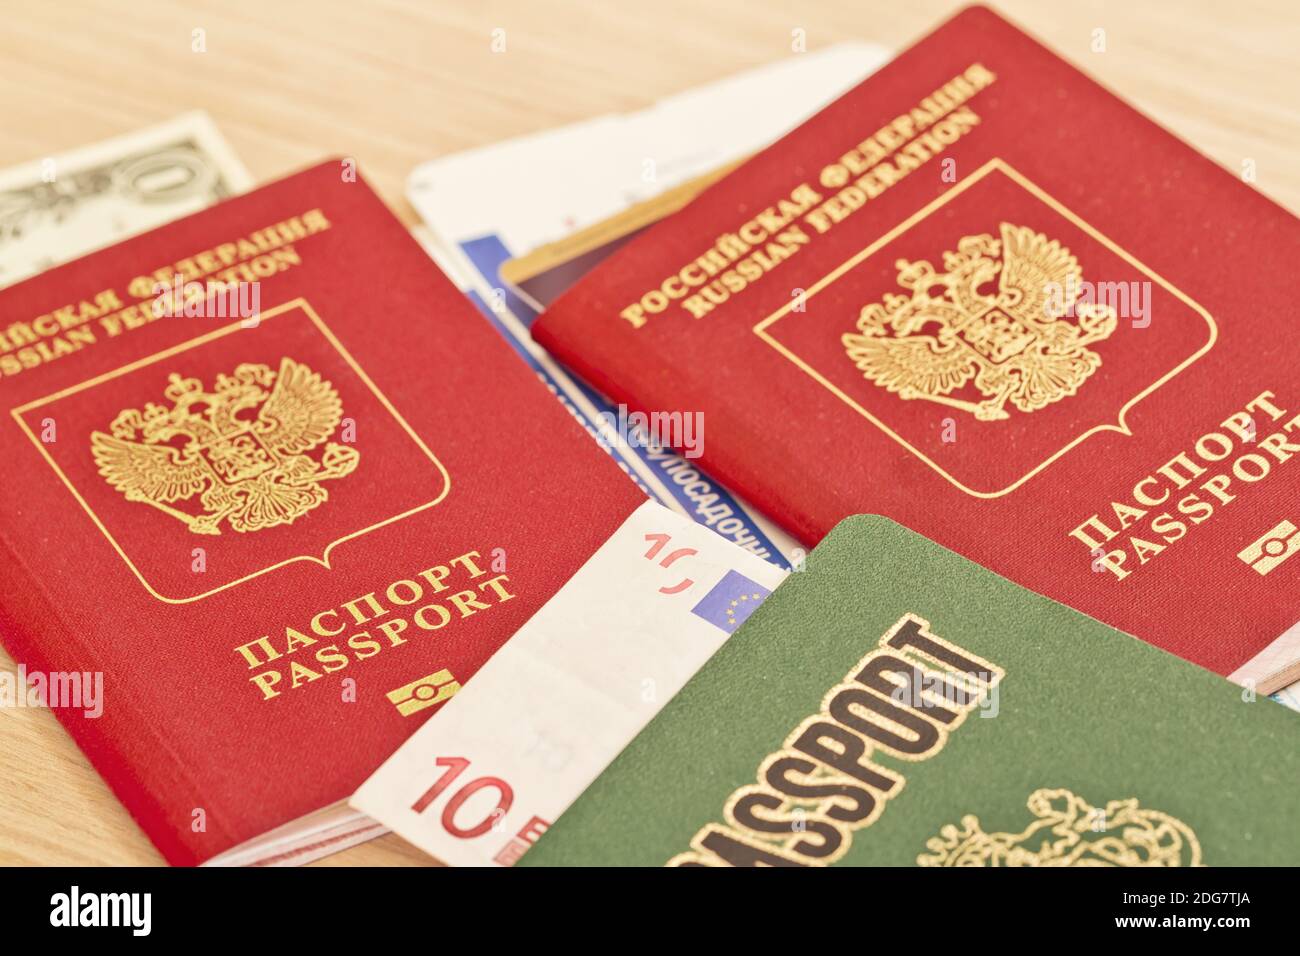 Fees before you travel. Things not to forget : passport, tickets and cash Stock Photo